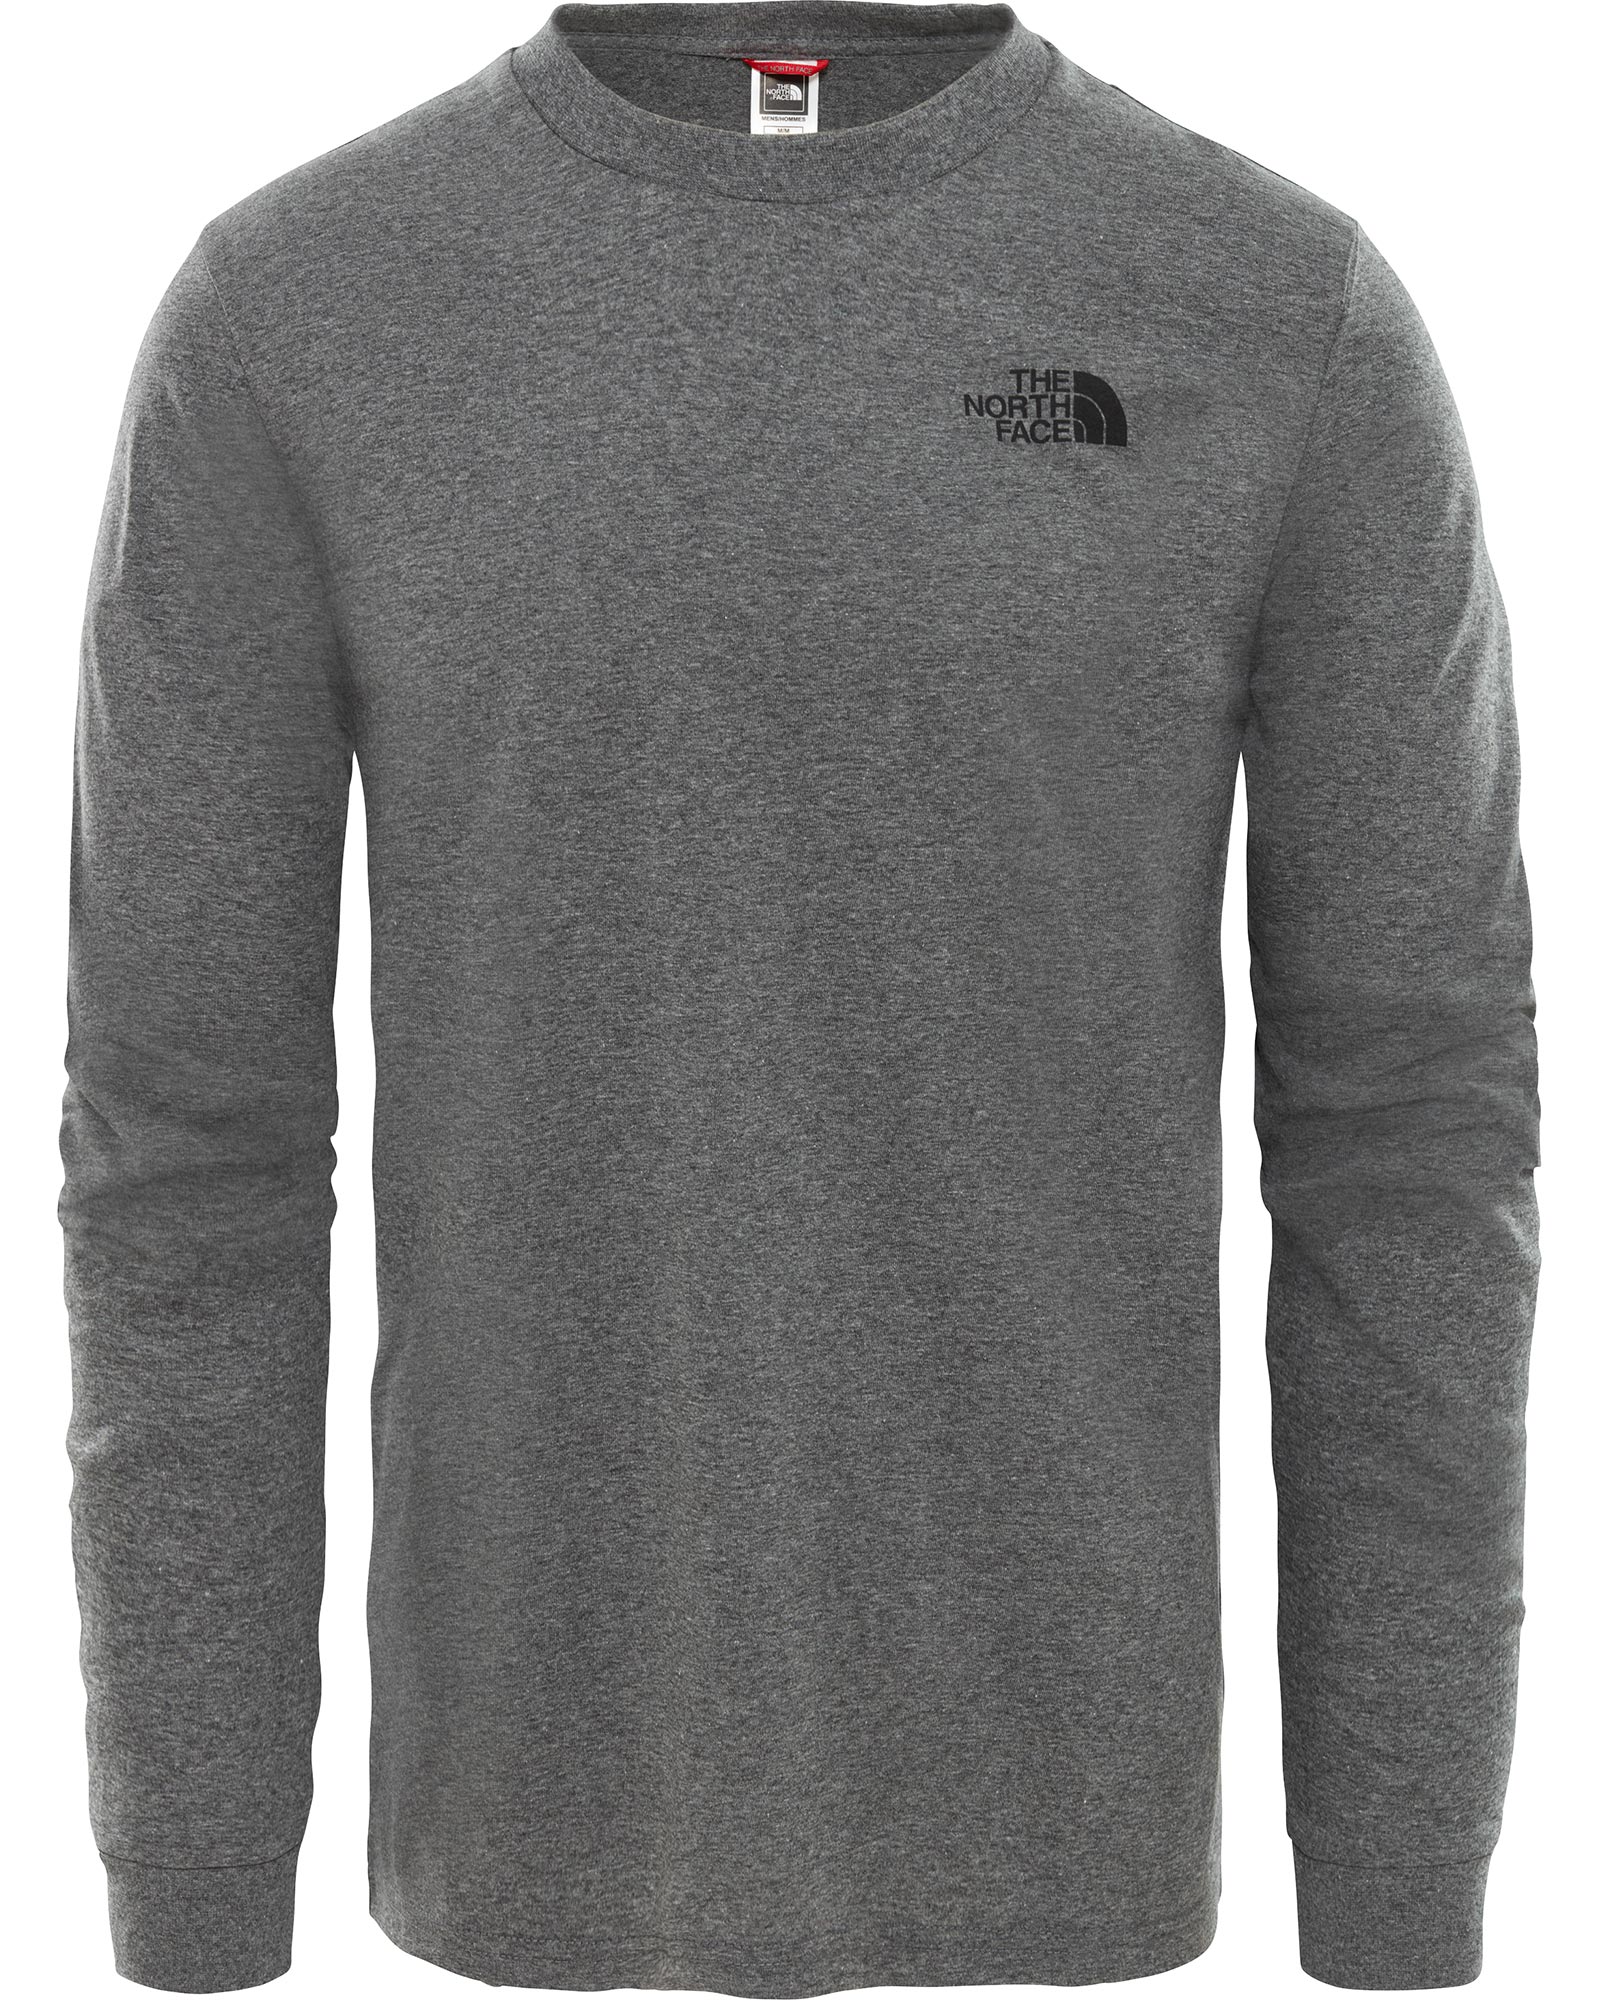 The North Face Simple Dome Men’s Long Sleeve T Shirt - TNF Medium Grey Heather XS